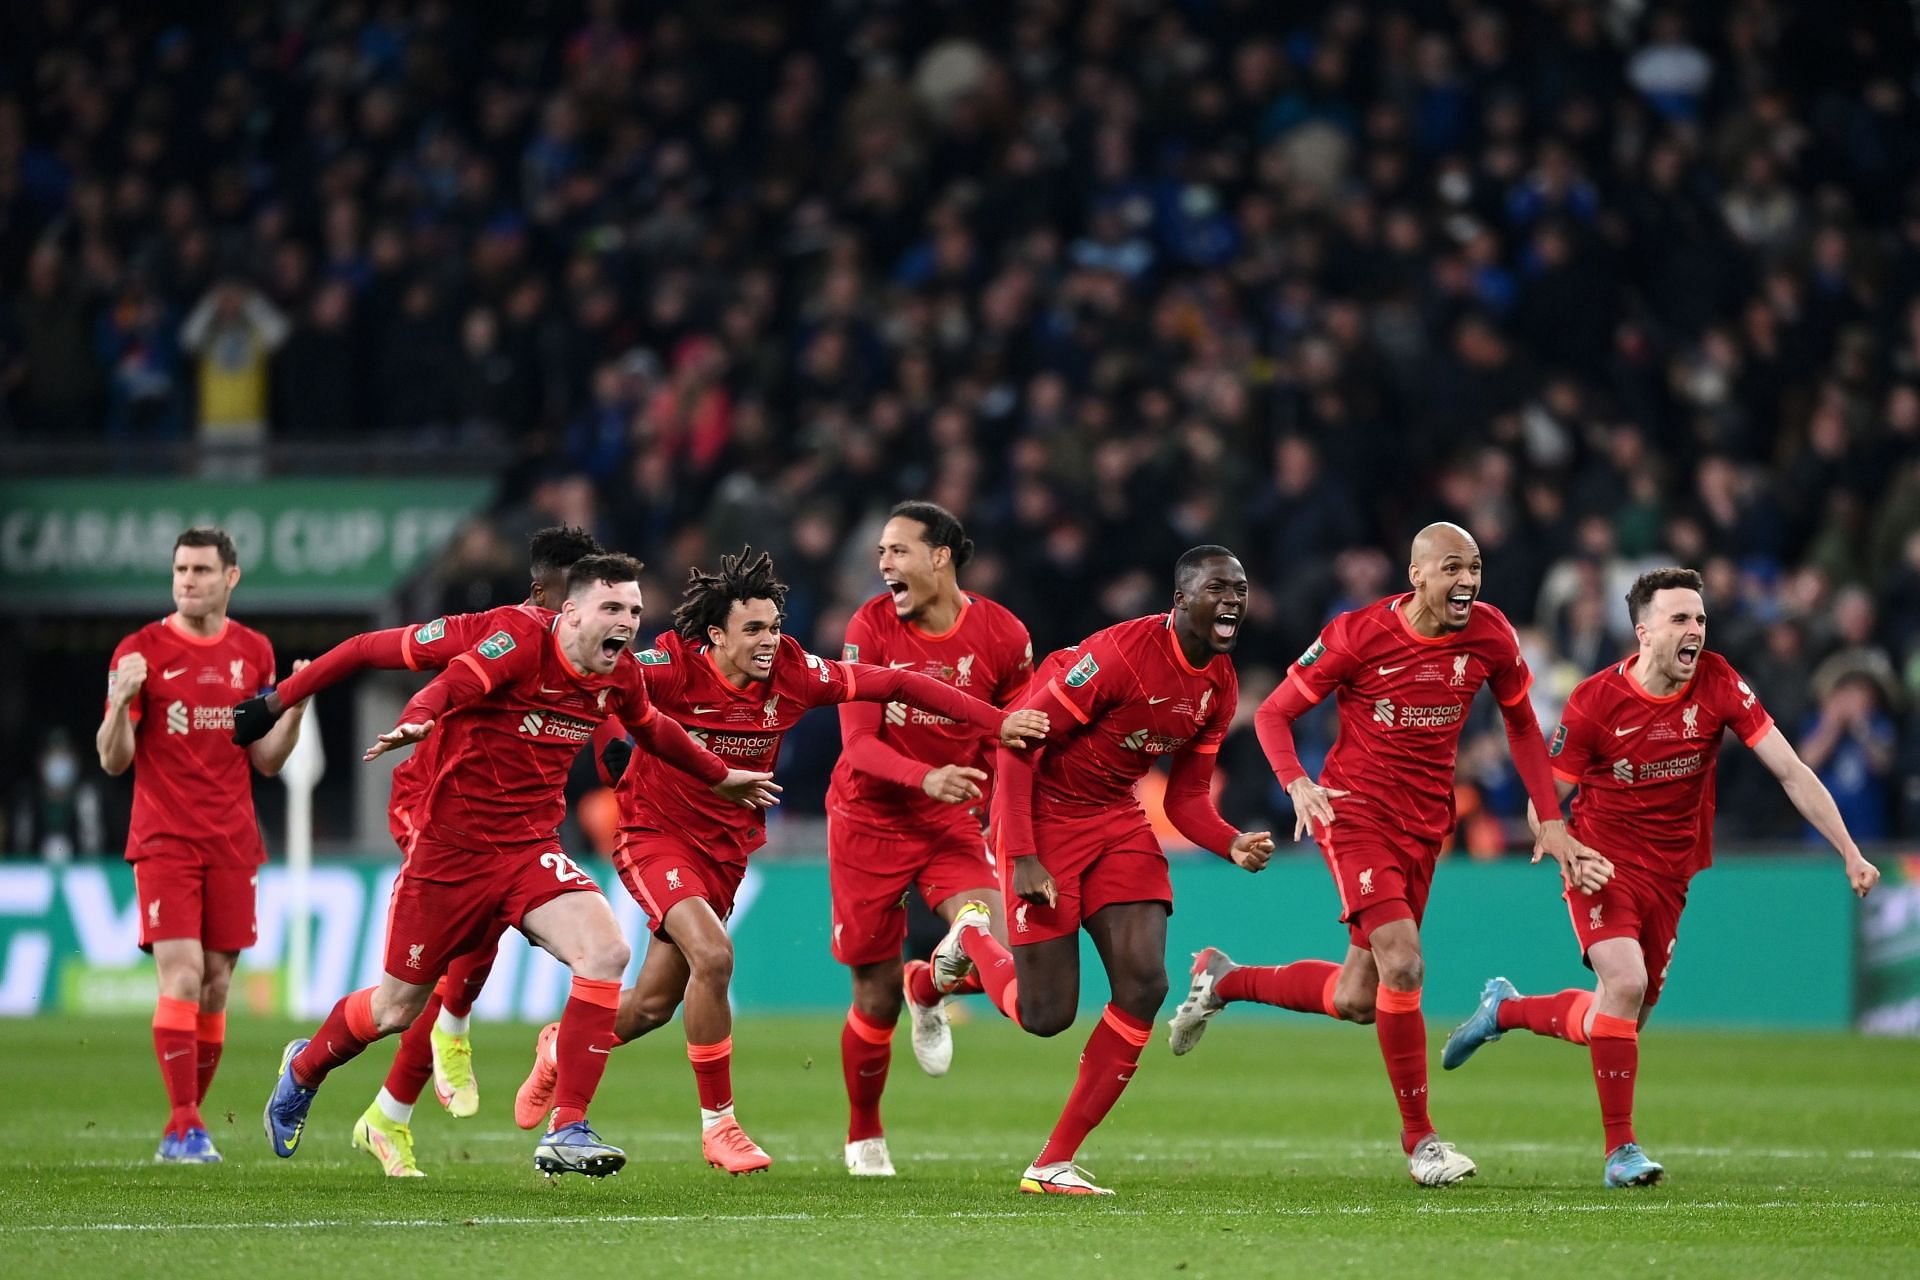 Liverpool players jubilant after winning the penalty shootout in the League Cup final against Chelsea